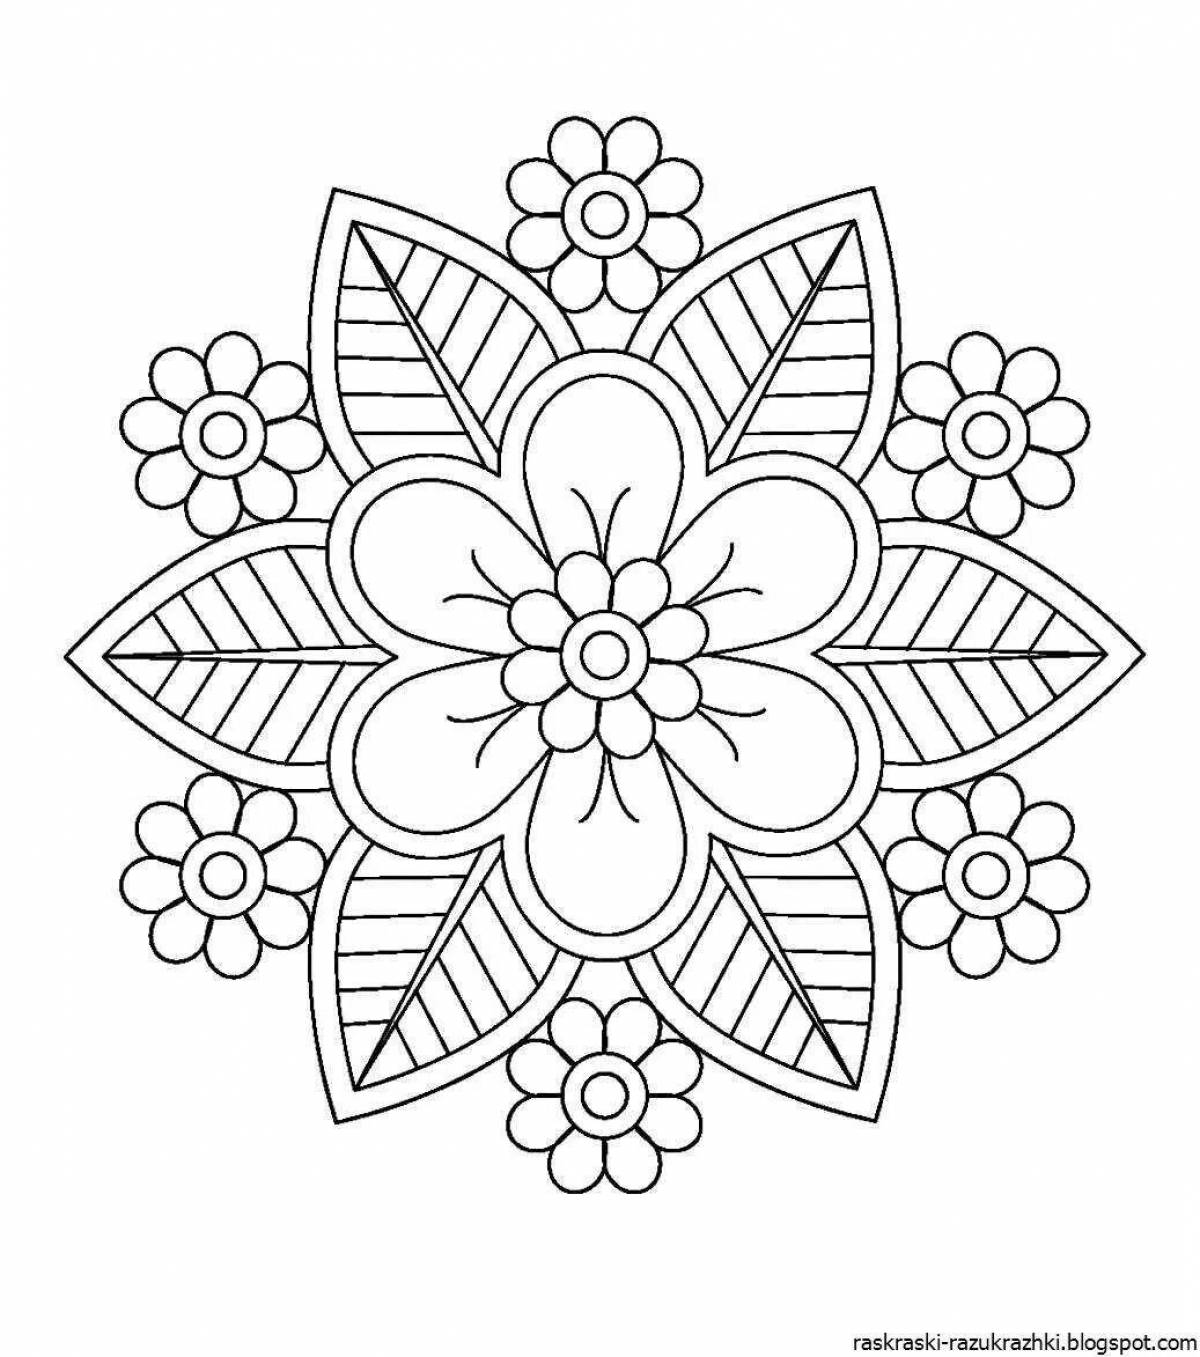 Amazing coloring pages with small patterns